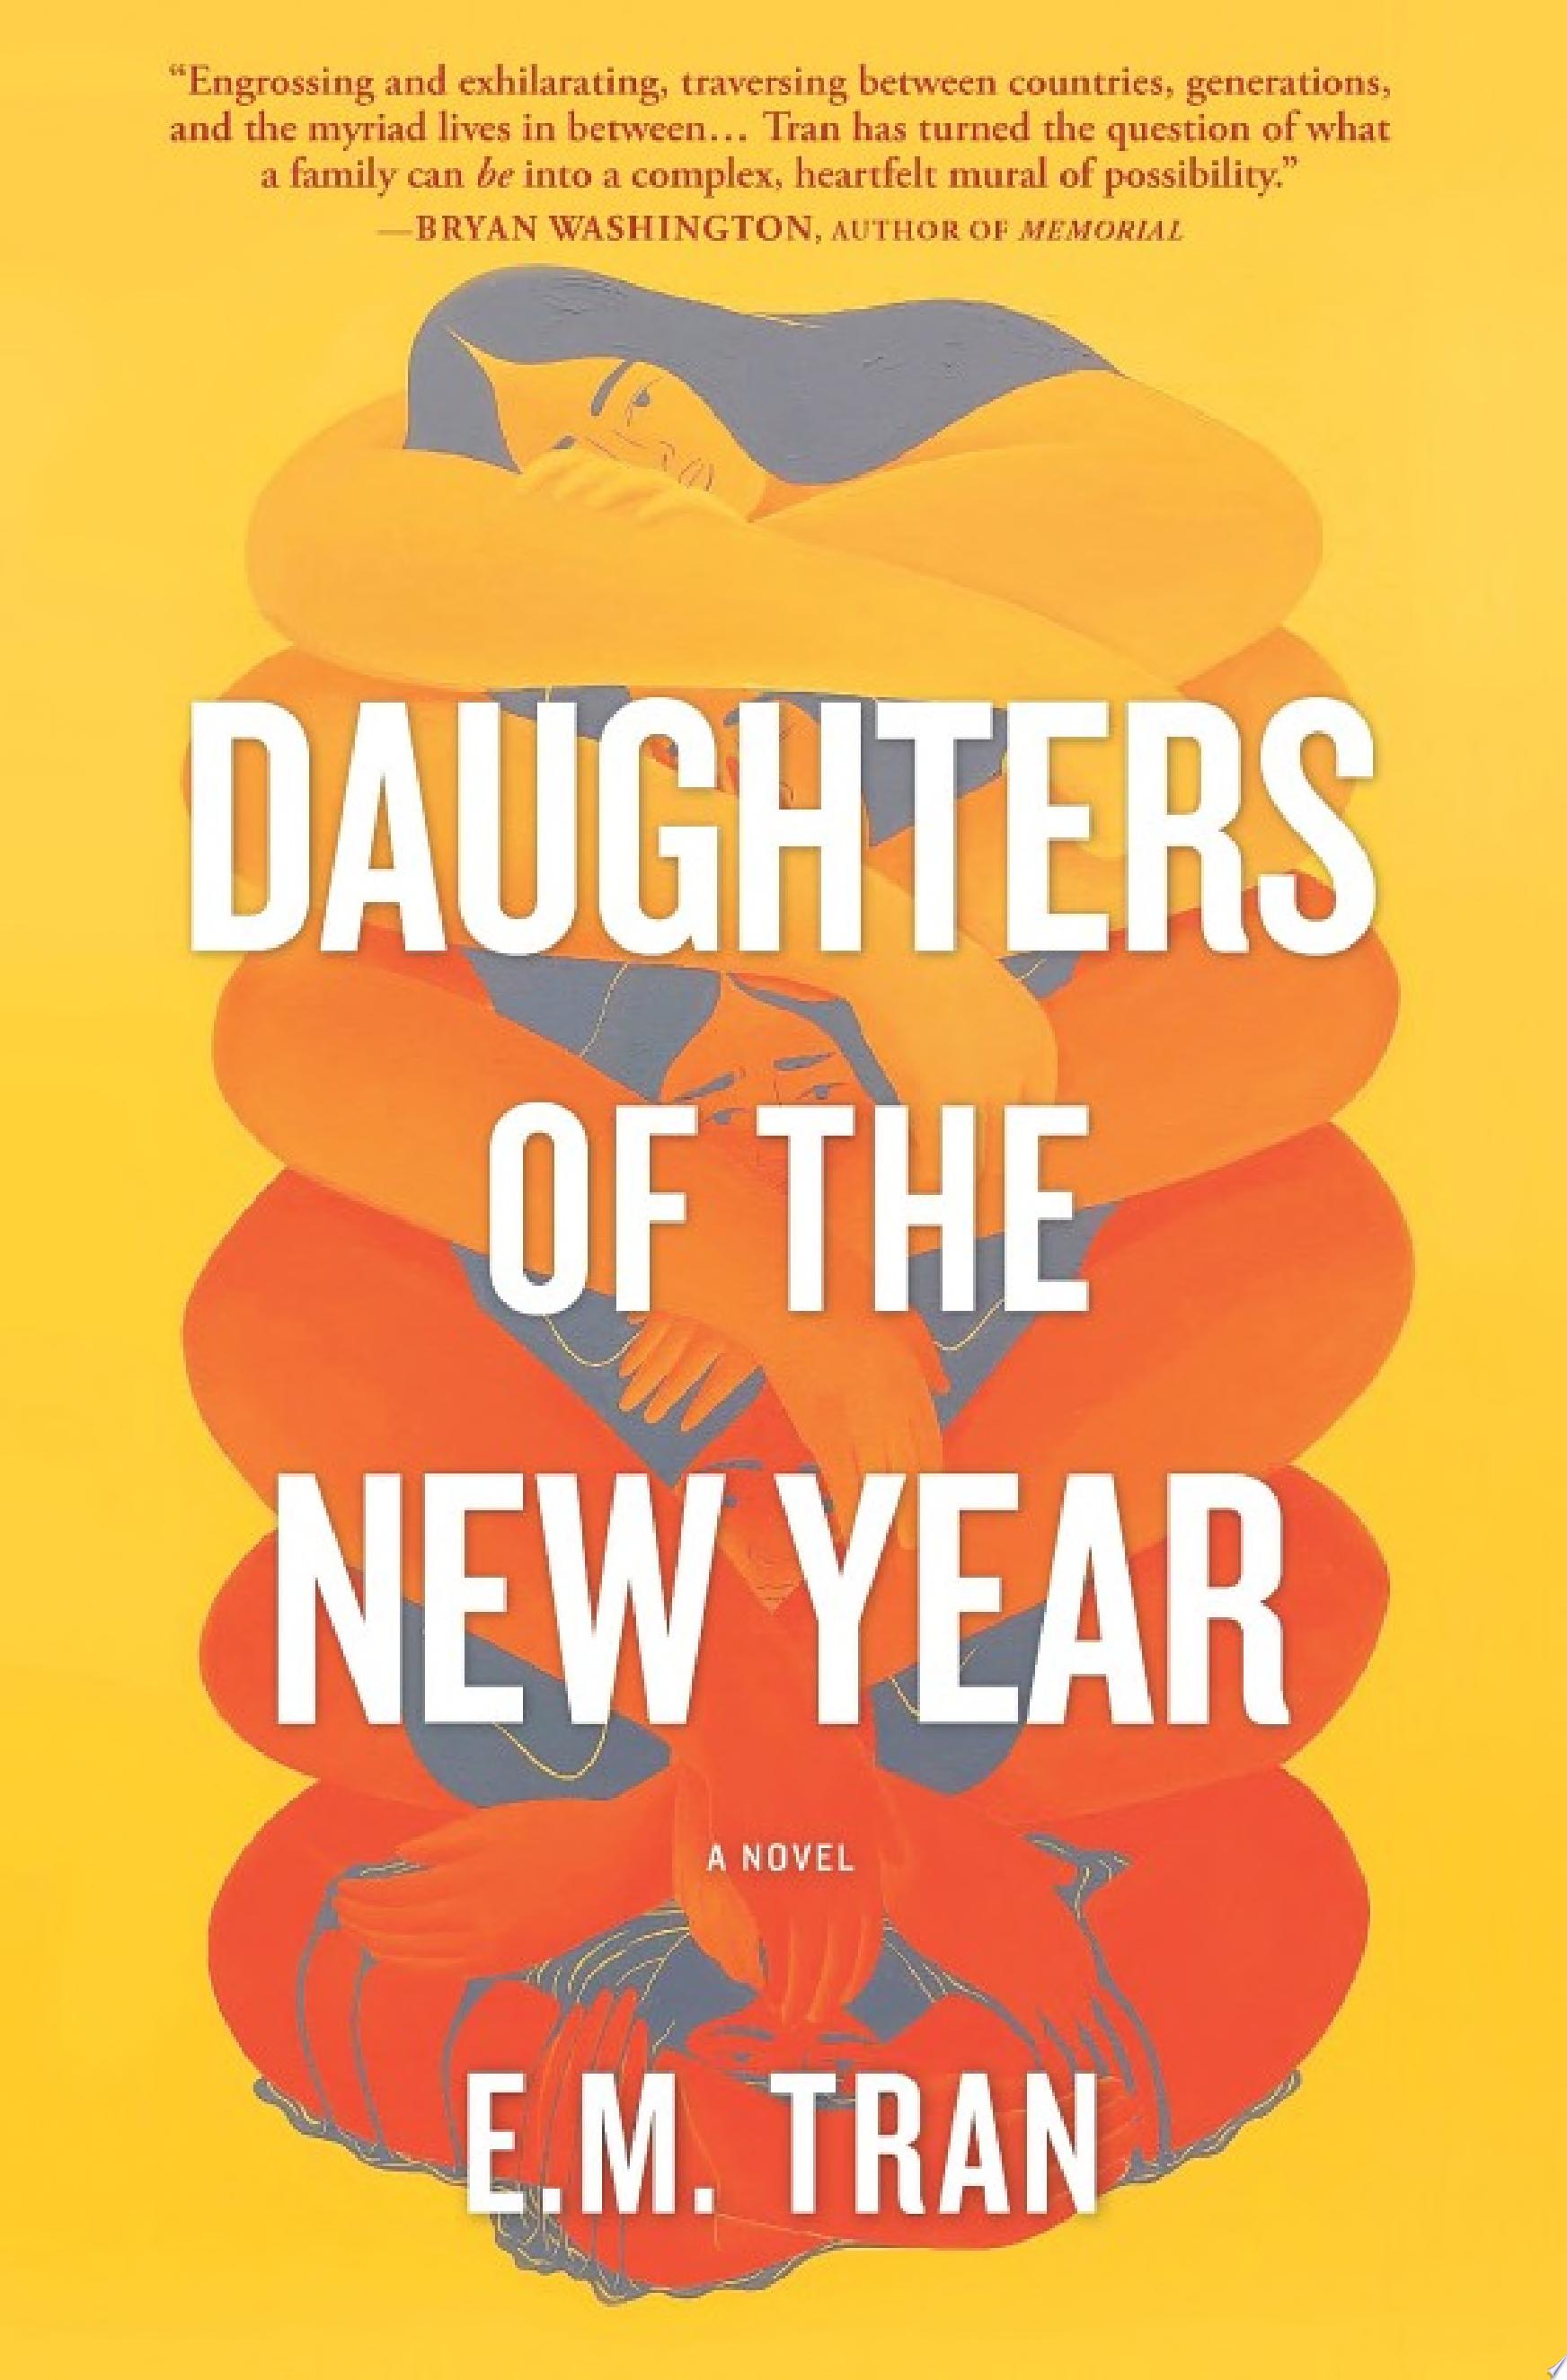 Image for "Daughters of the New Year"